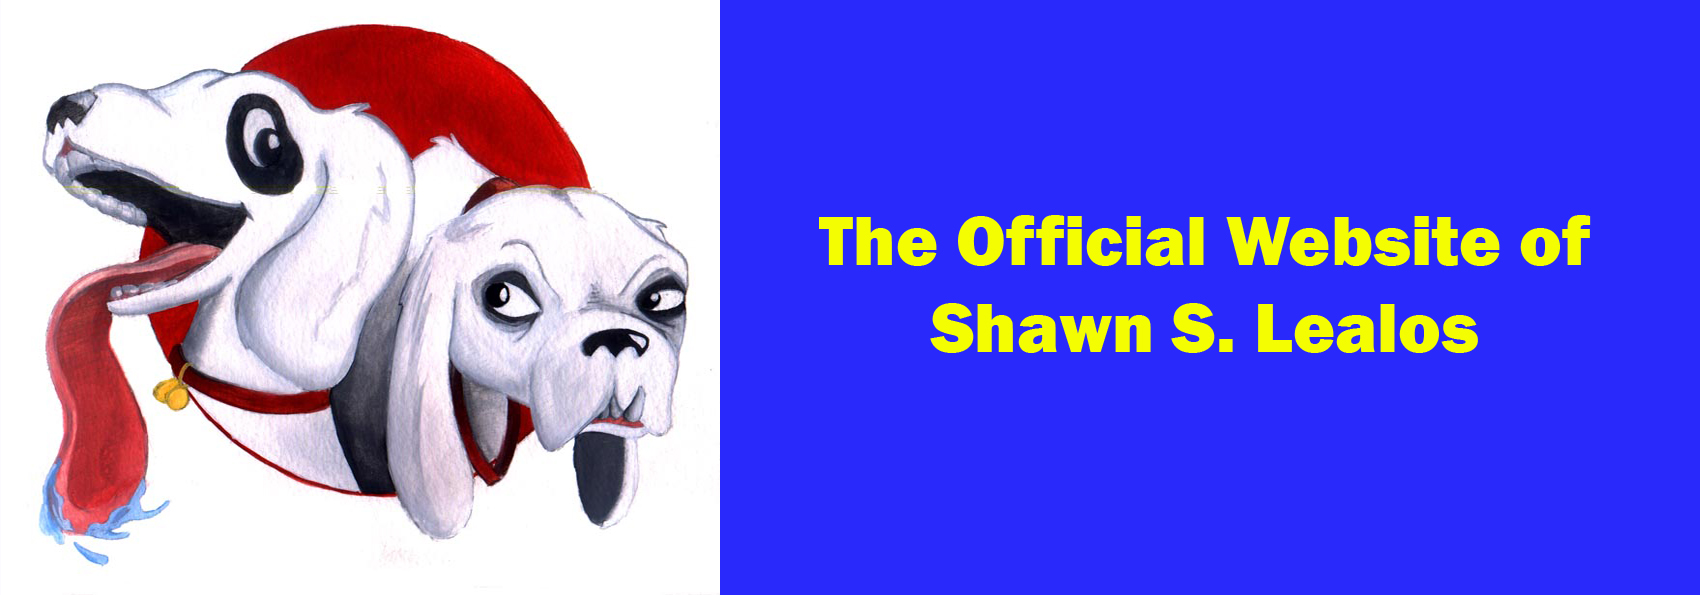 The Official Website of Shawn S. Lealos